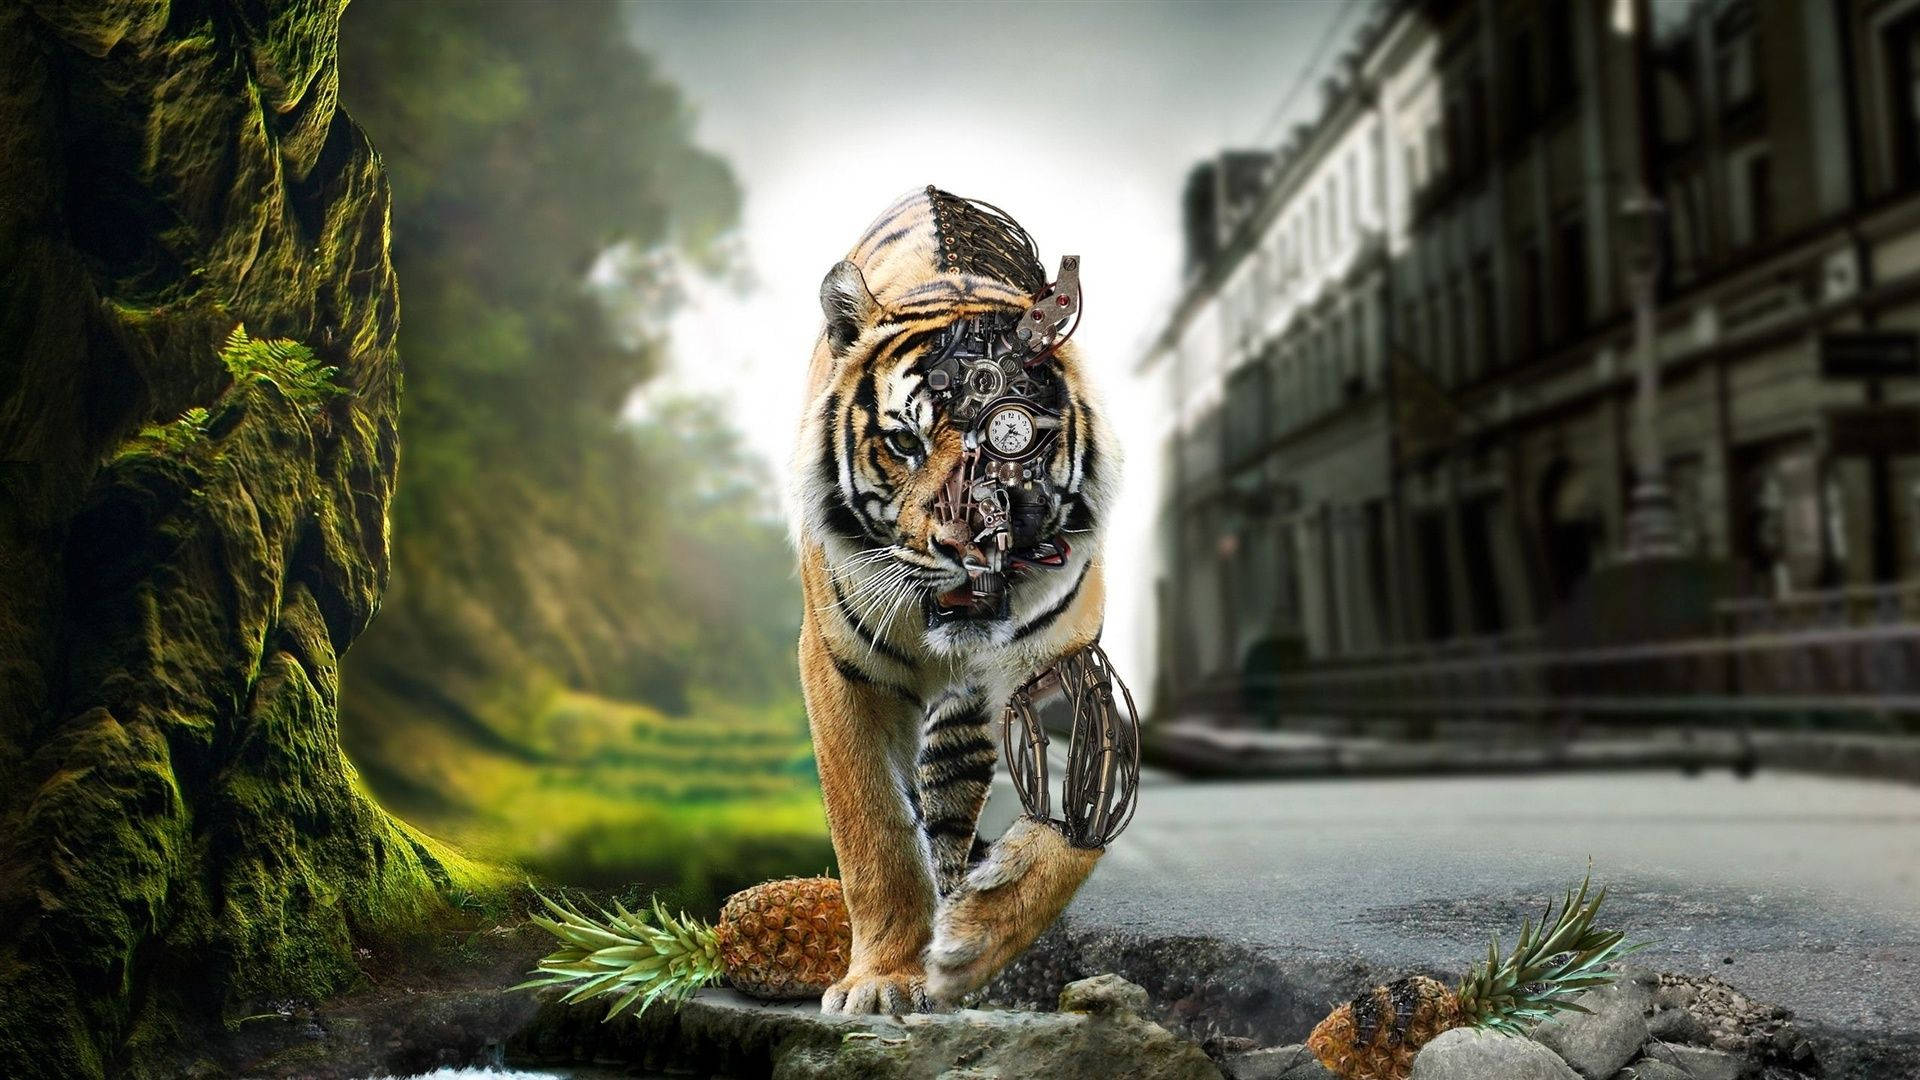 Tiger Nature And City